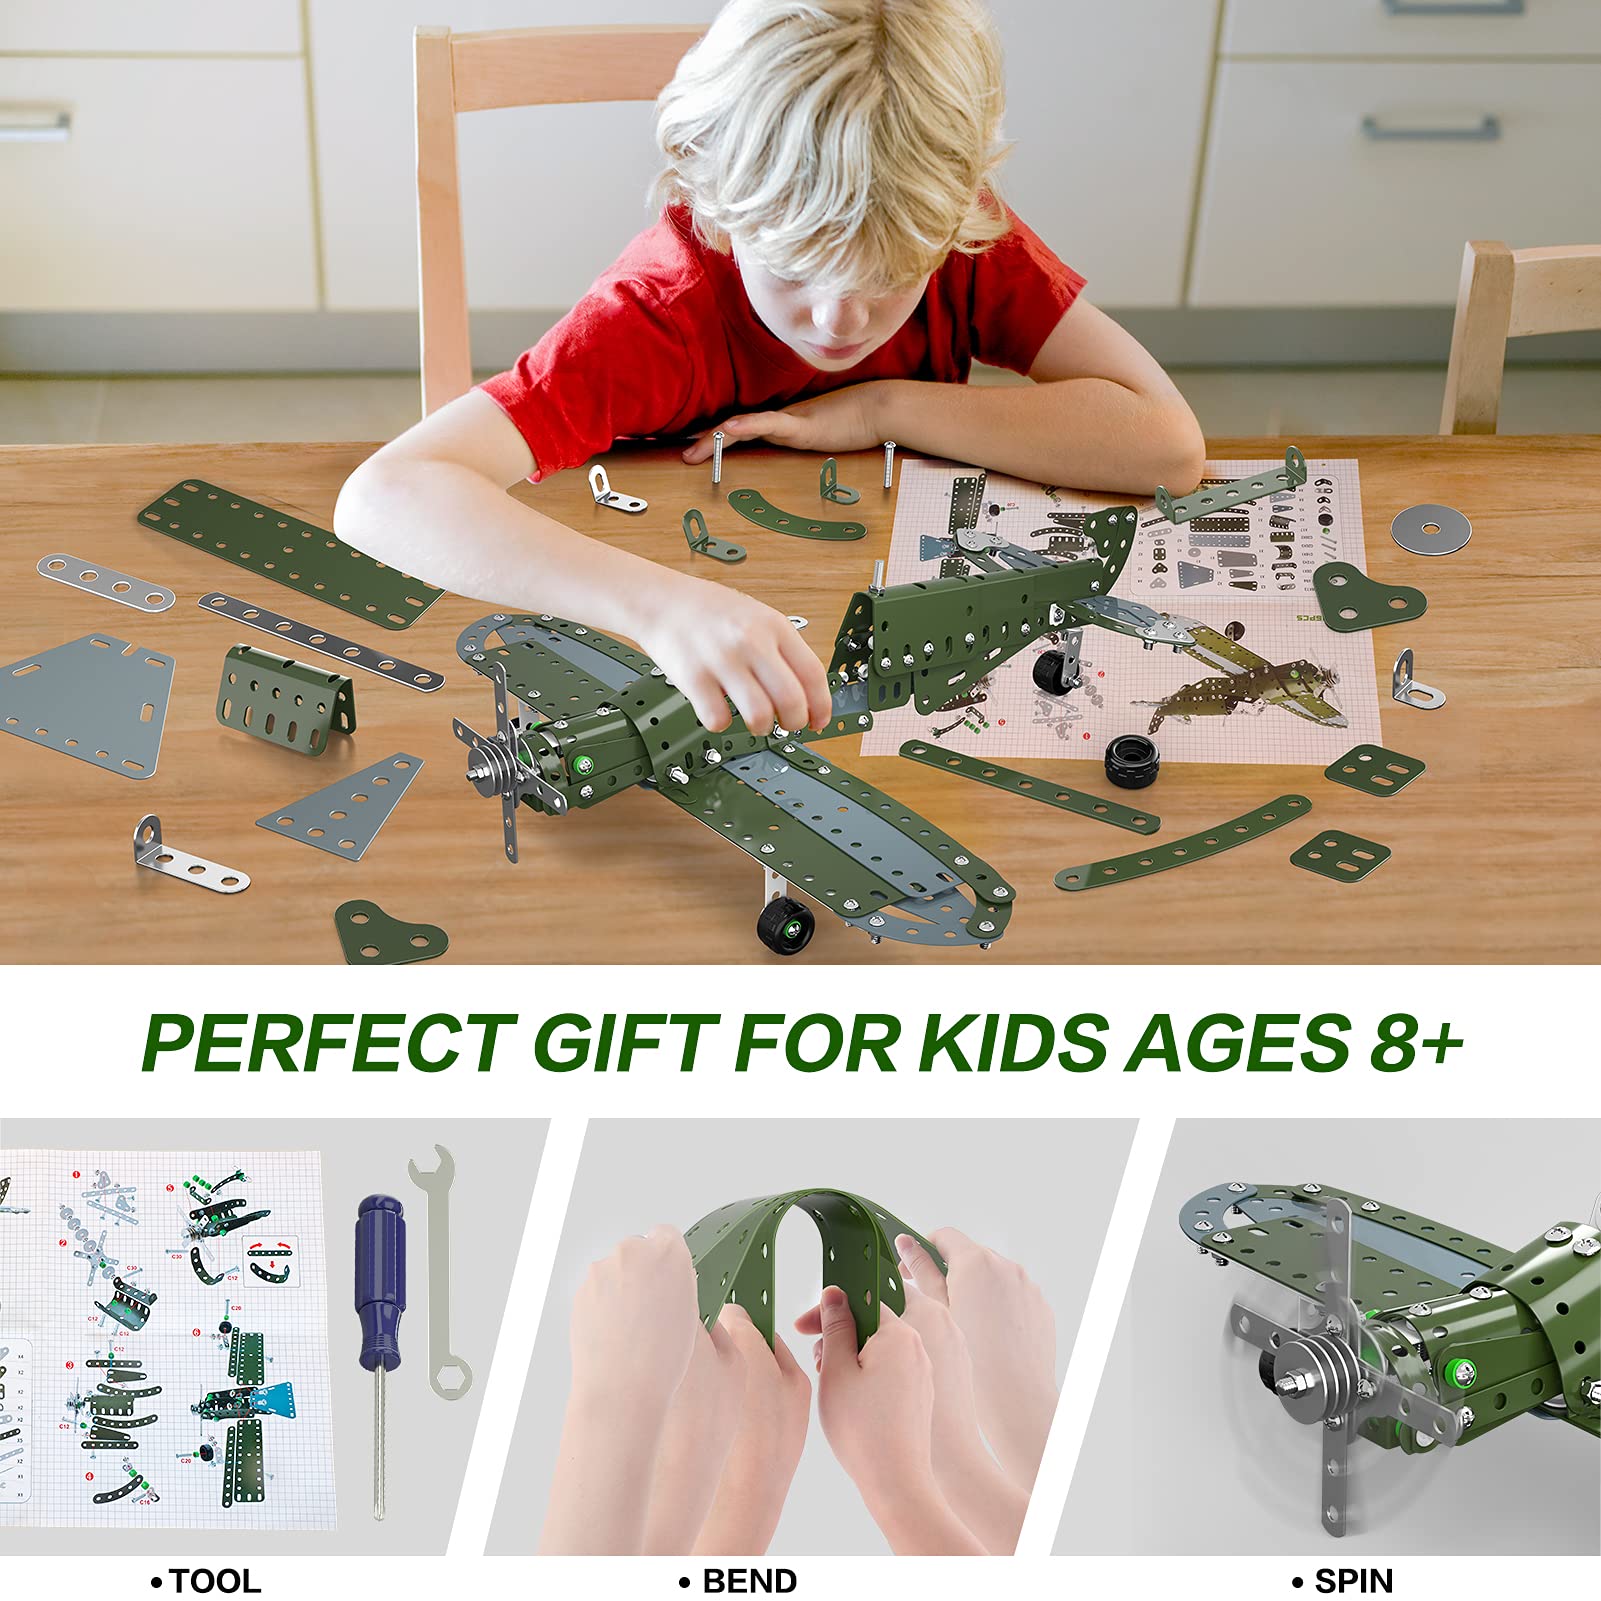 Lucky Doug Building Toys Model Airplane Set -258 Pieces DIY Building Stem Projects Toys for Kids Boys Ages 8-12 and Older,Building Assembly Science Educational Toys Set Gifts for Model Aircraft Fan